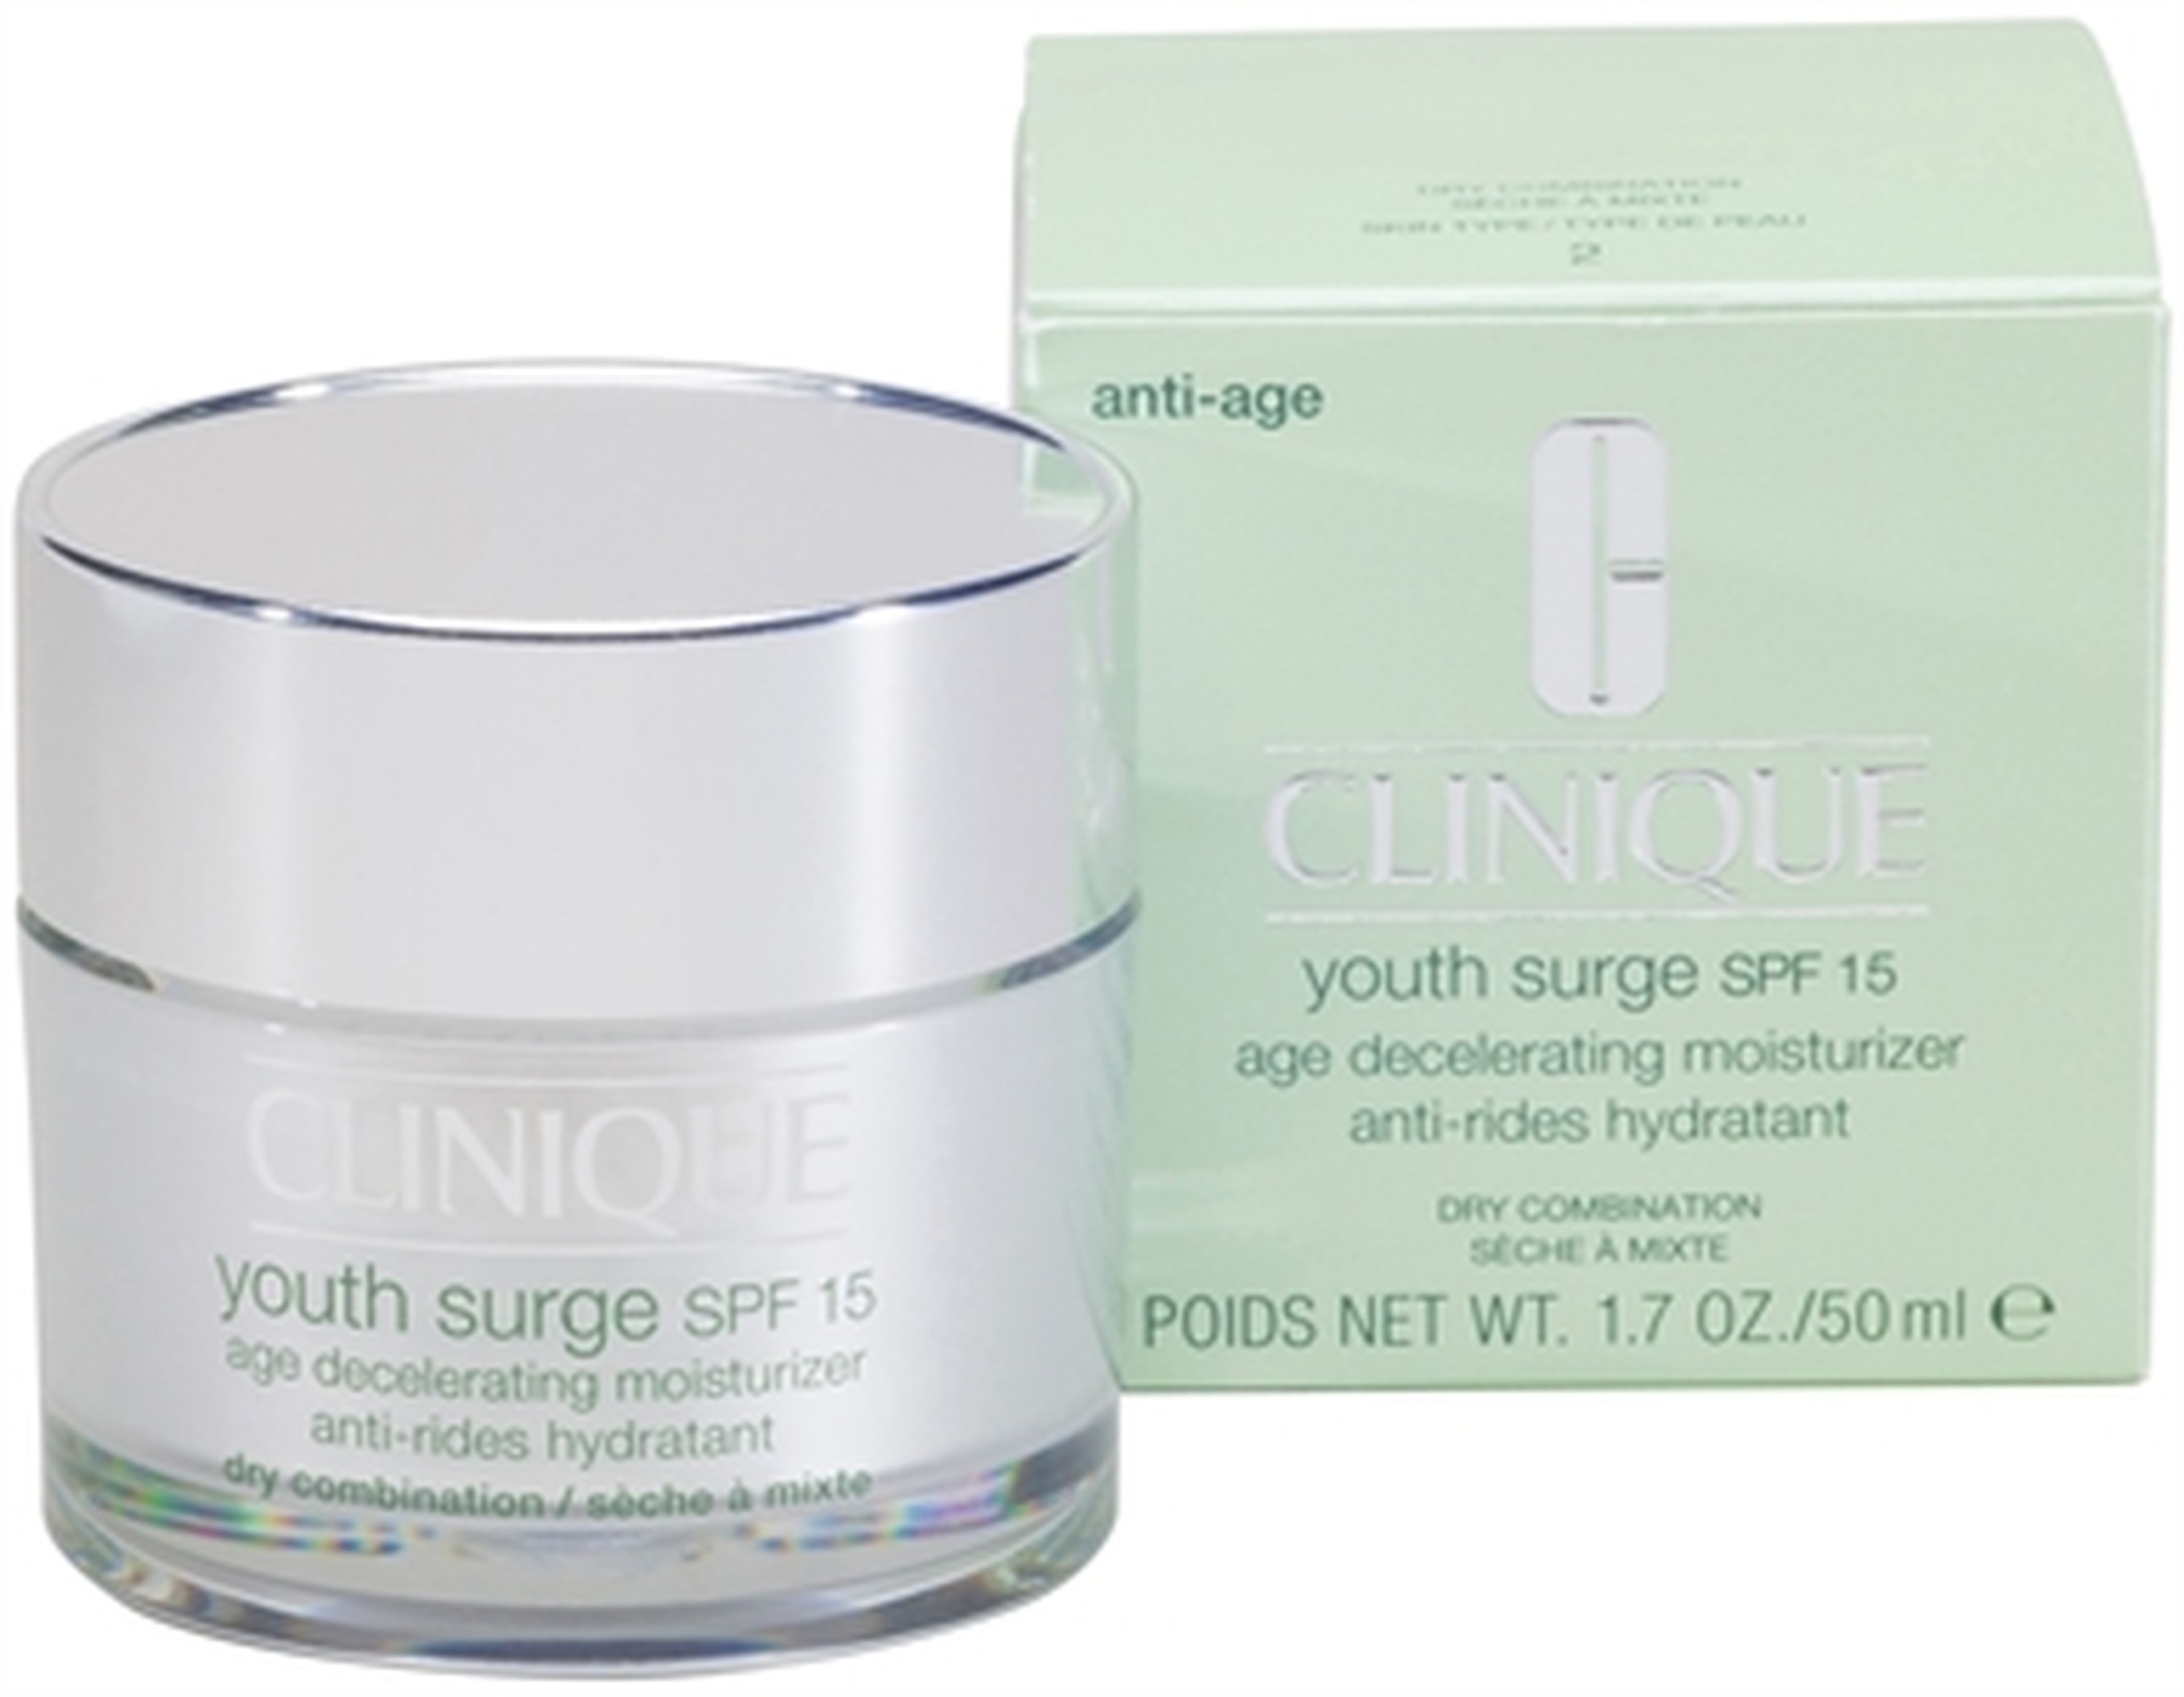 Clinique Youth Surge Age Decelerating Dry Combination